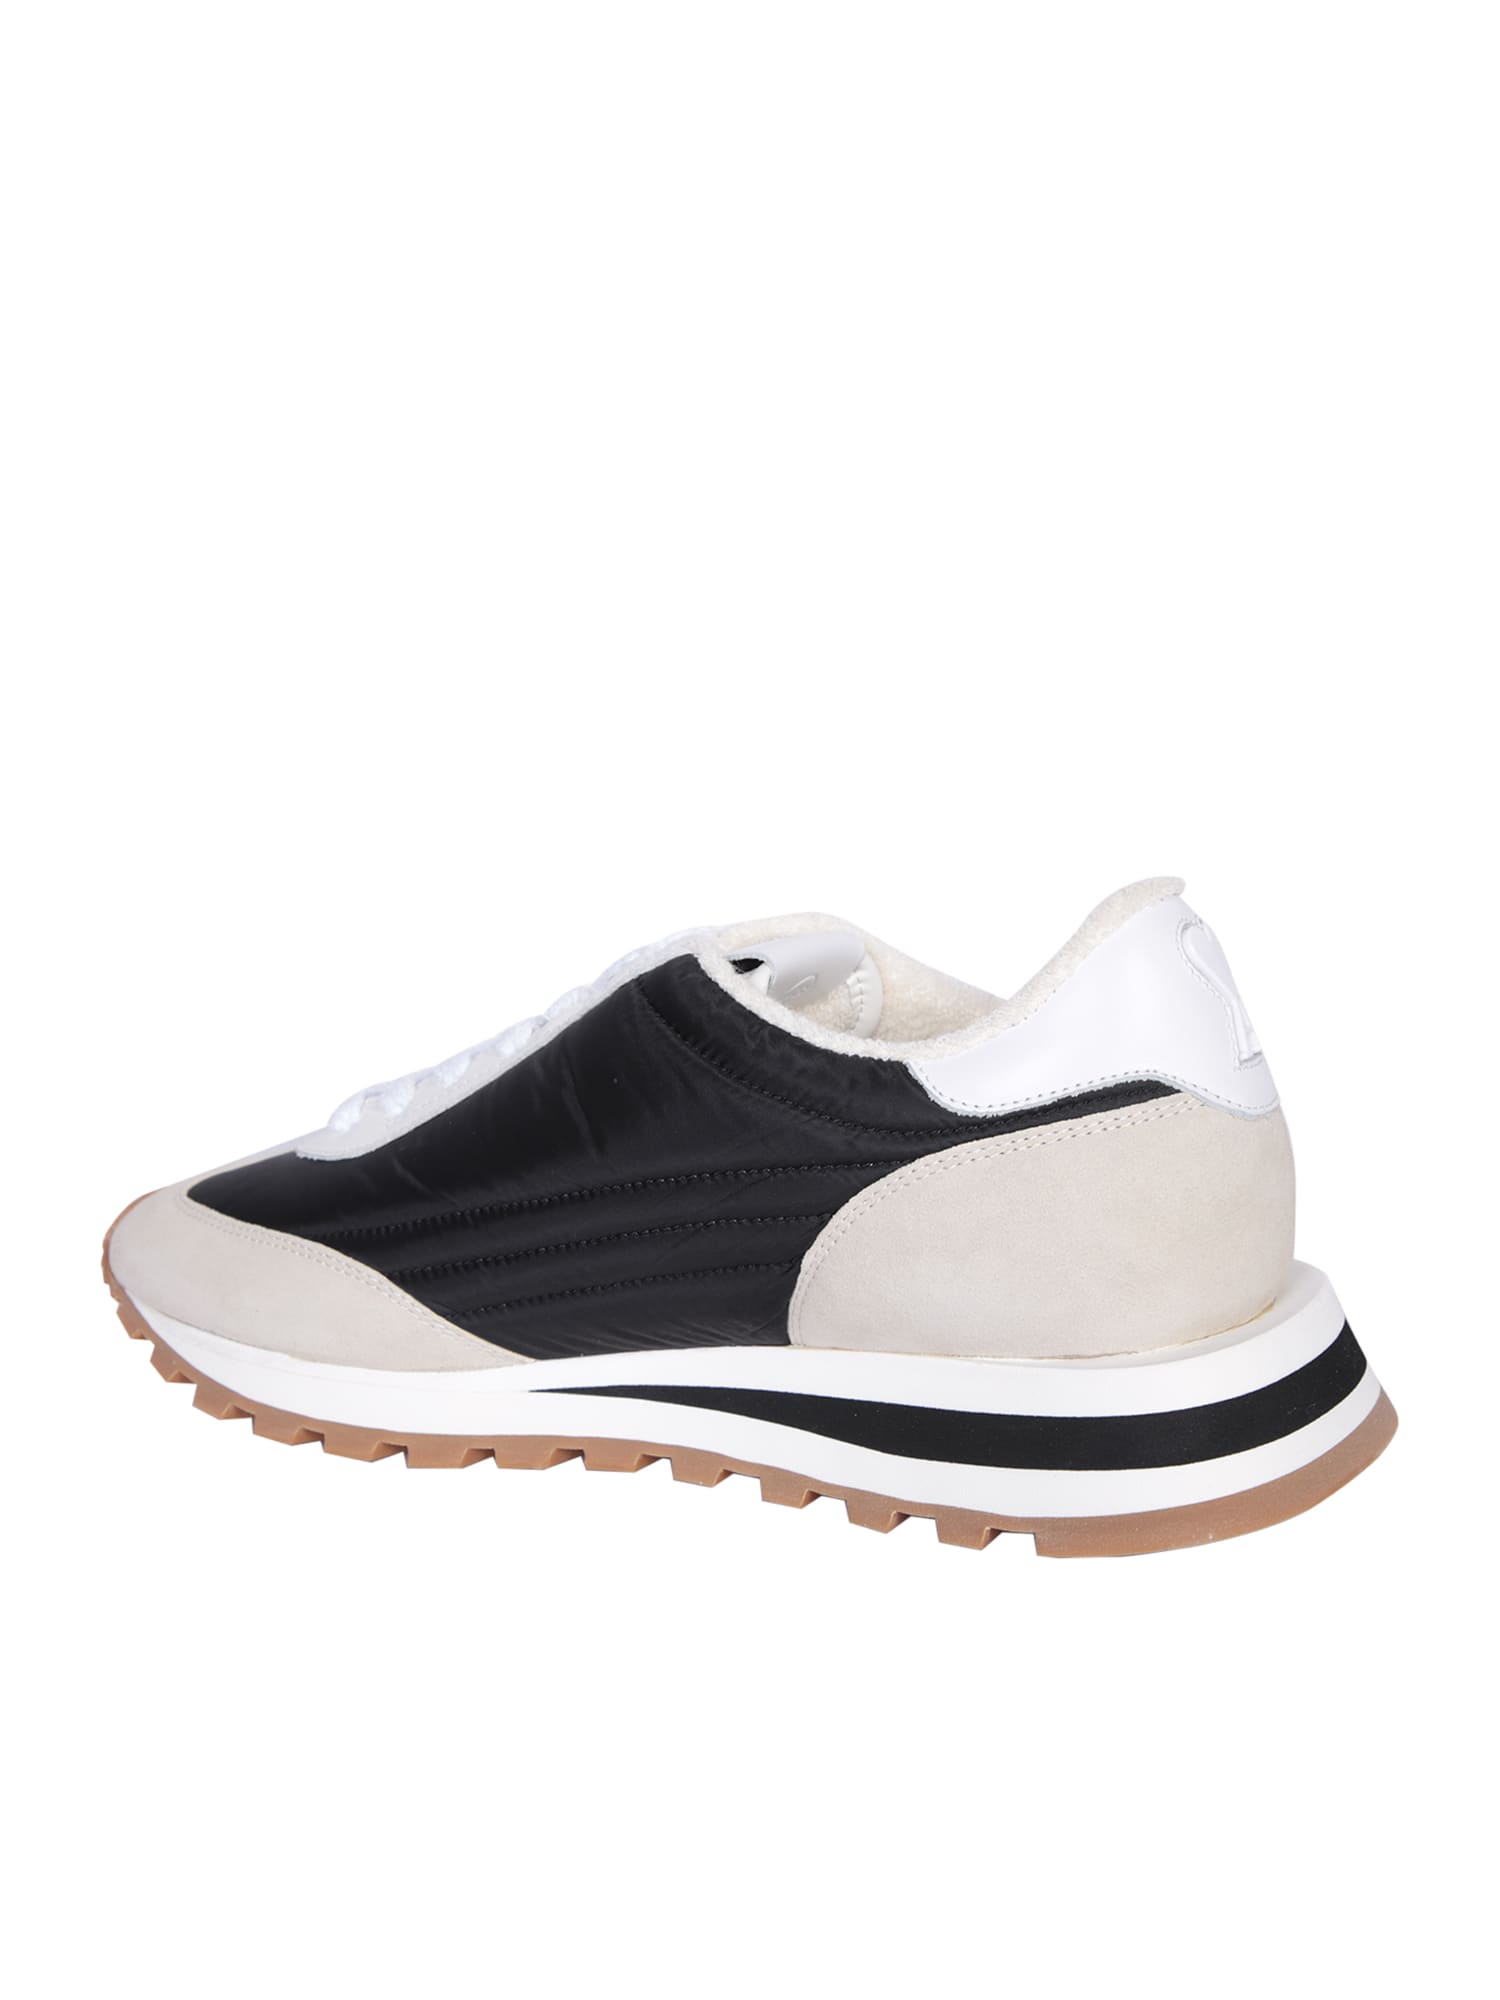 Shop Ami Alexandre Mattiussi Ami Rush Leather And Canvas Sneakers In Black And Ivory